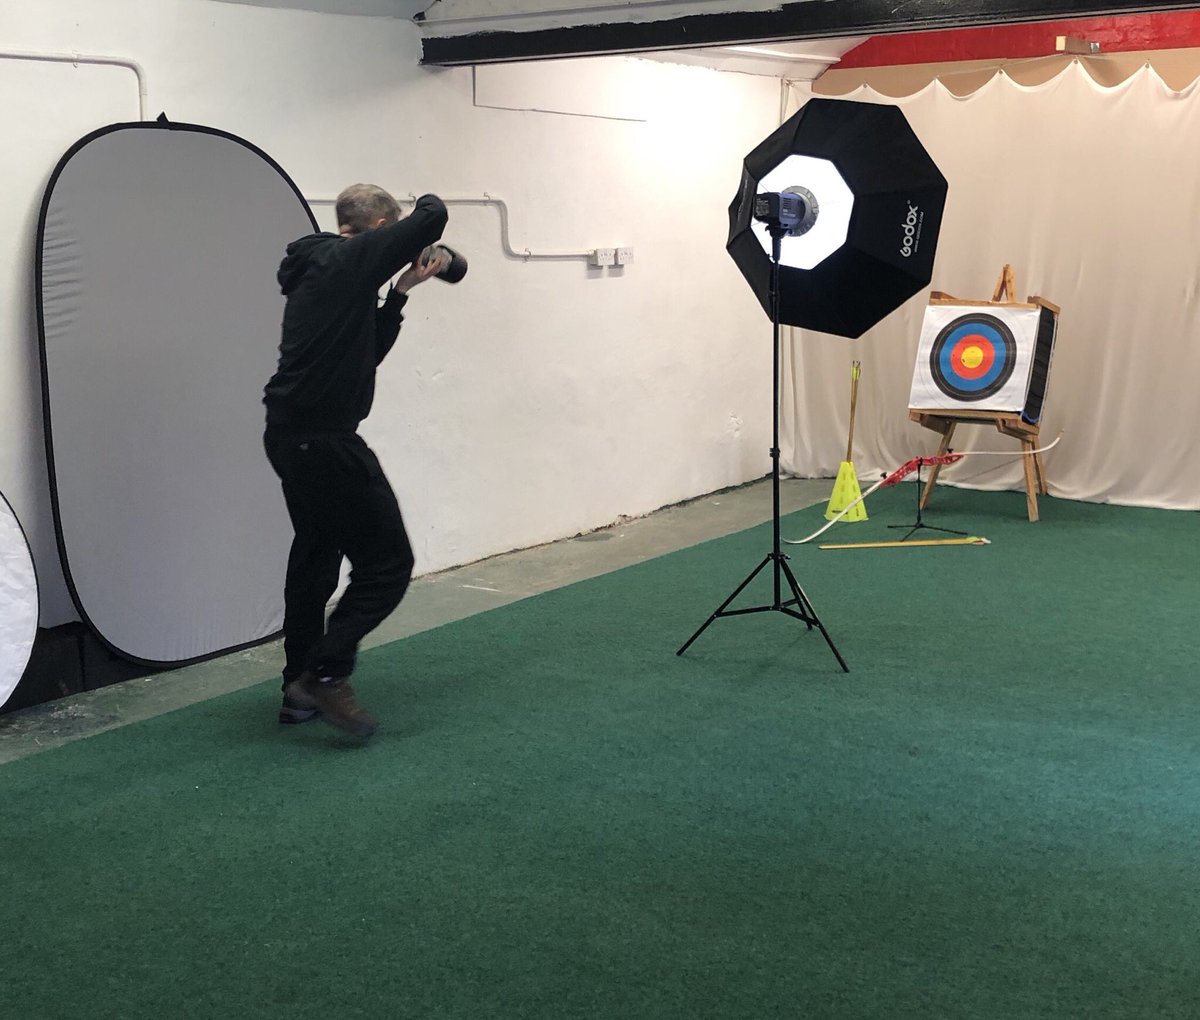 Some Archery product shots being created yesterday! #Archery #Blackpool #DaysOutBlackpool #ThingsToDoBlackpool impactblackpool.co.uk